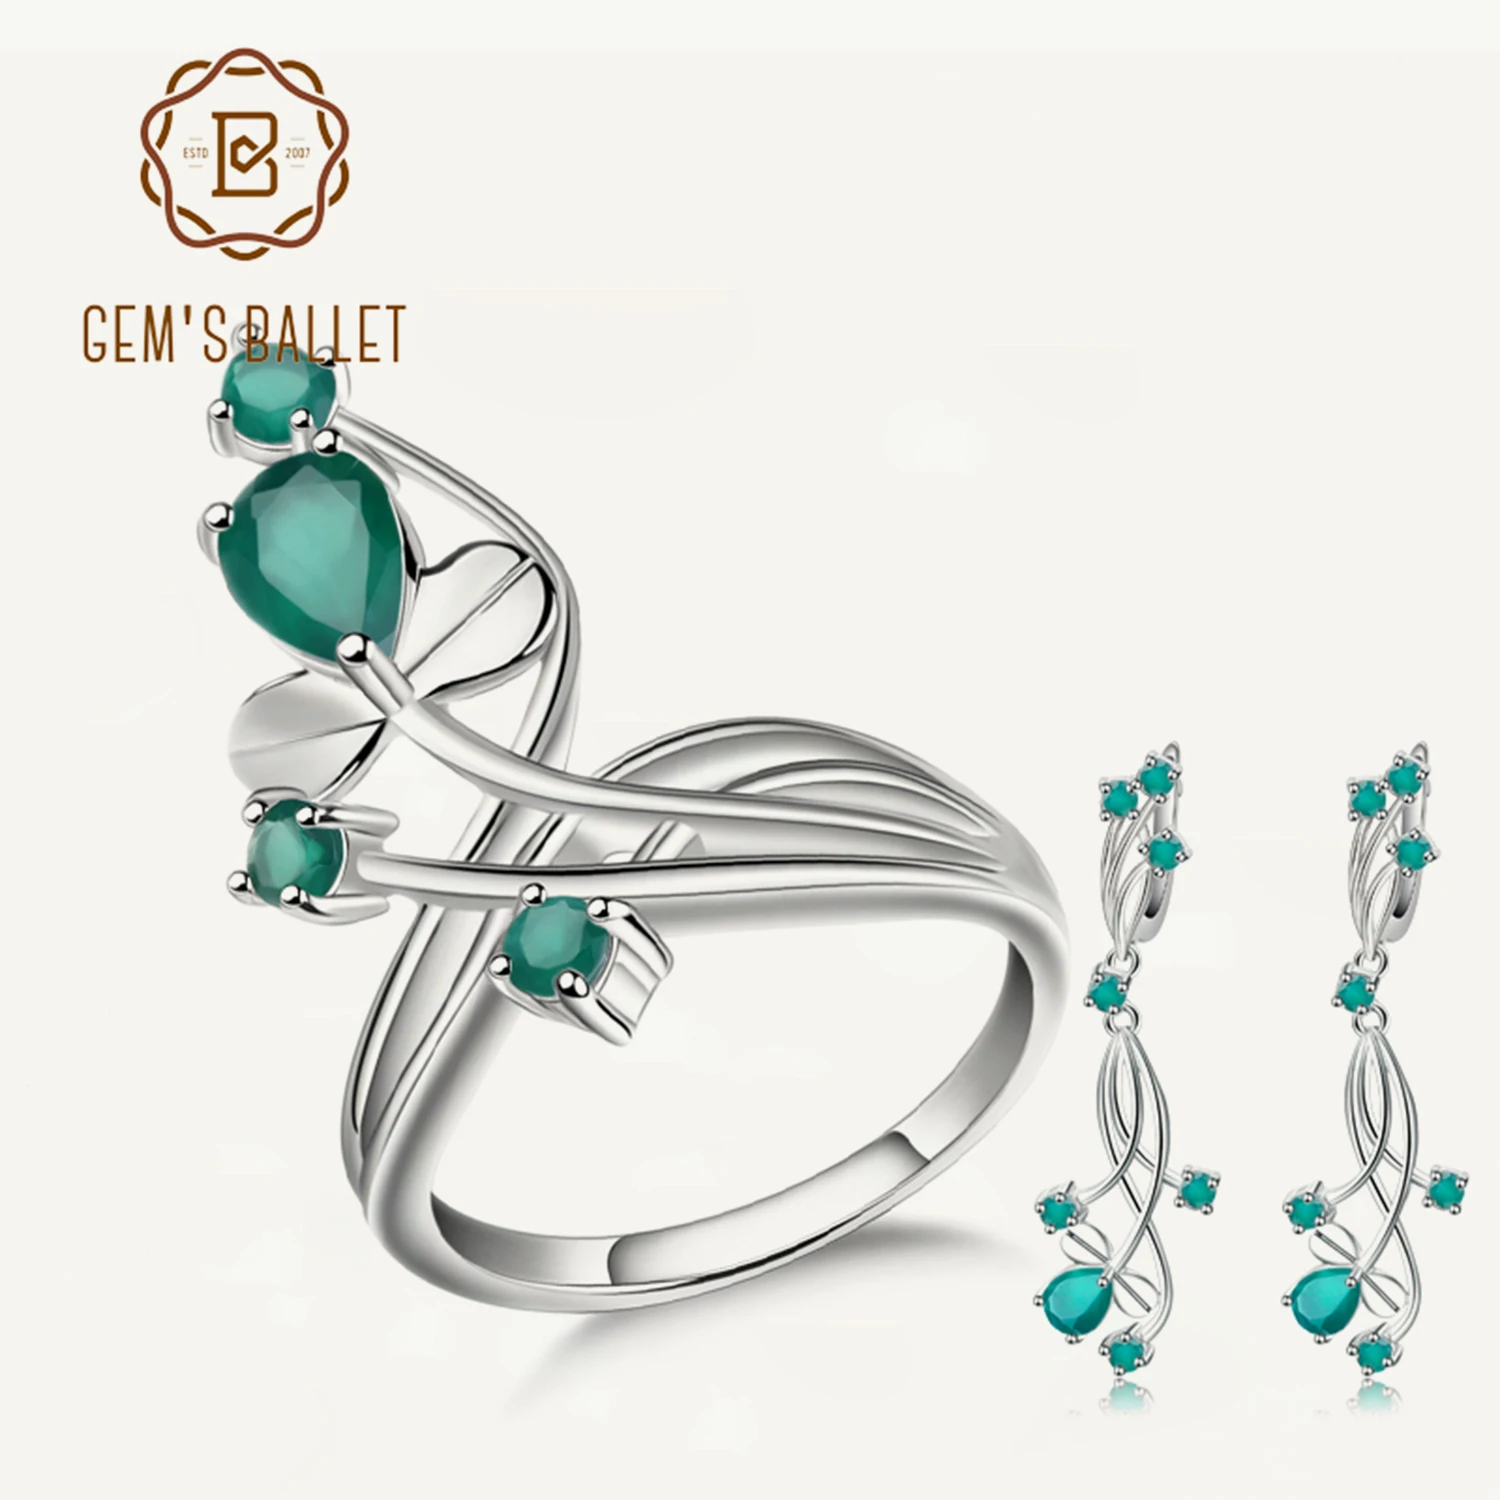 gem's-ballet-new-925-sterling-silver-earrings-ring-sets-for-women-party-jewelry-natural-green-agate-gemstone-vintage-jewelry-set